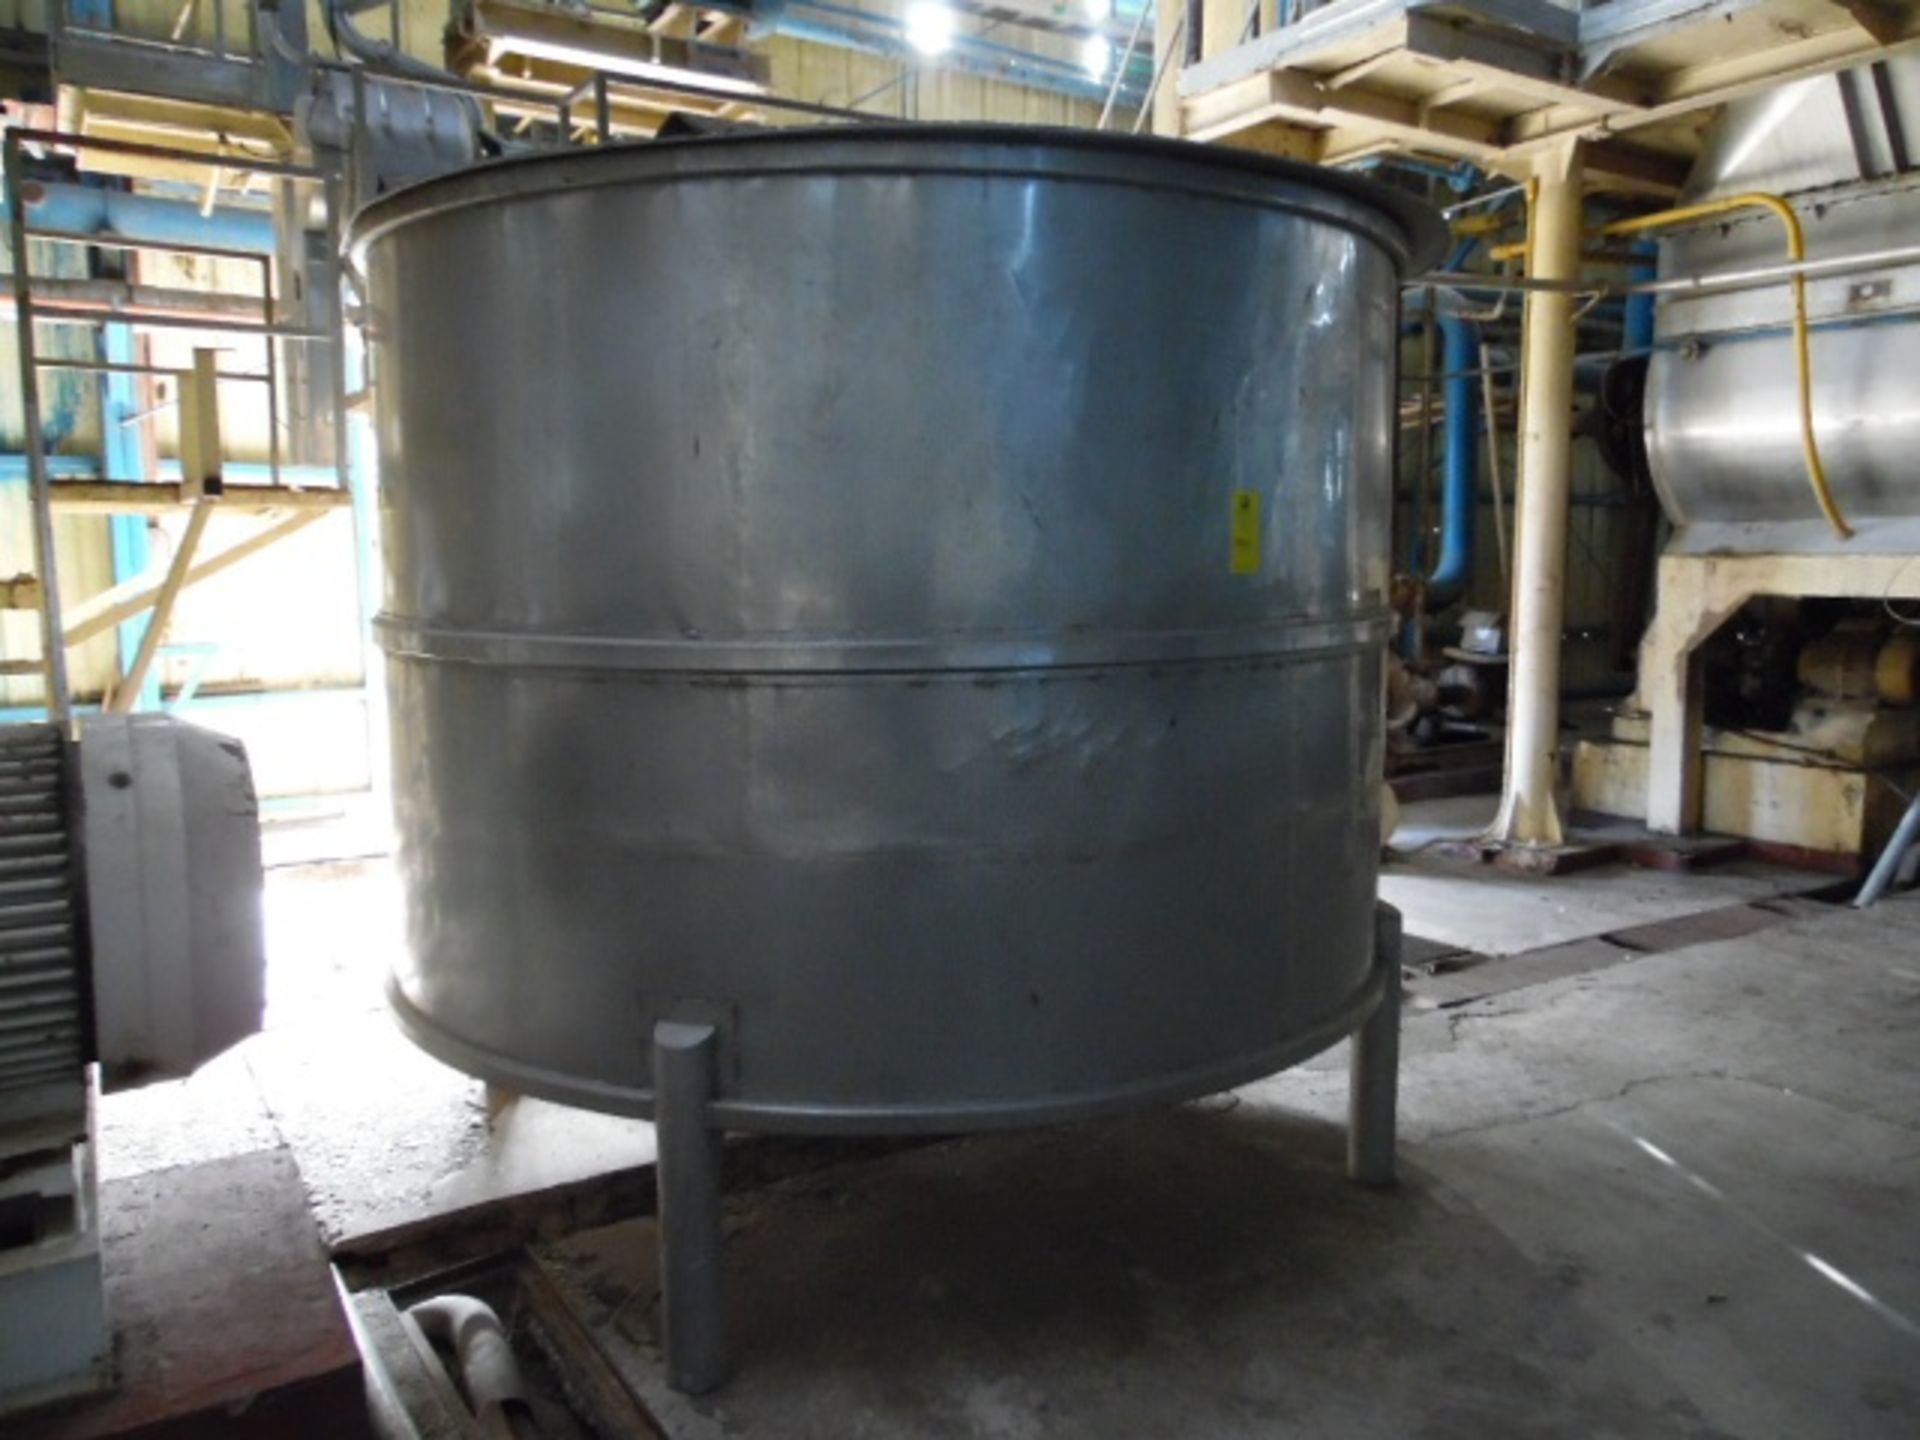 Stainless steel tank with 2.70 meters diameter and height of 3 meters approximately (Tanque de acero